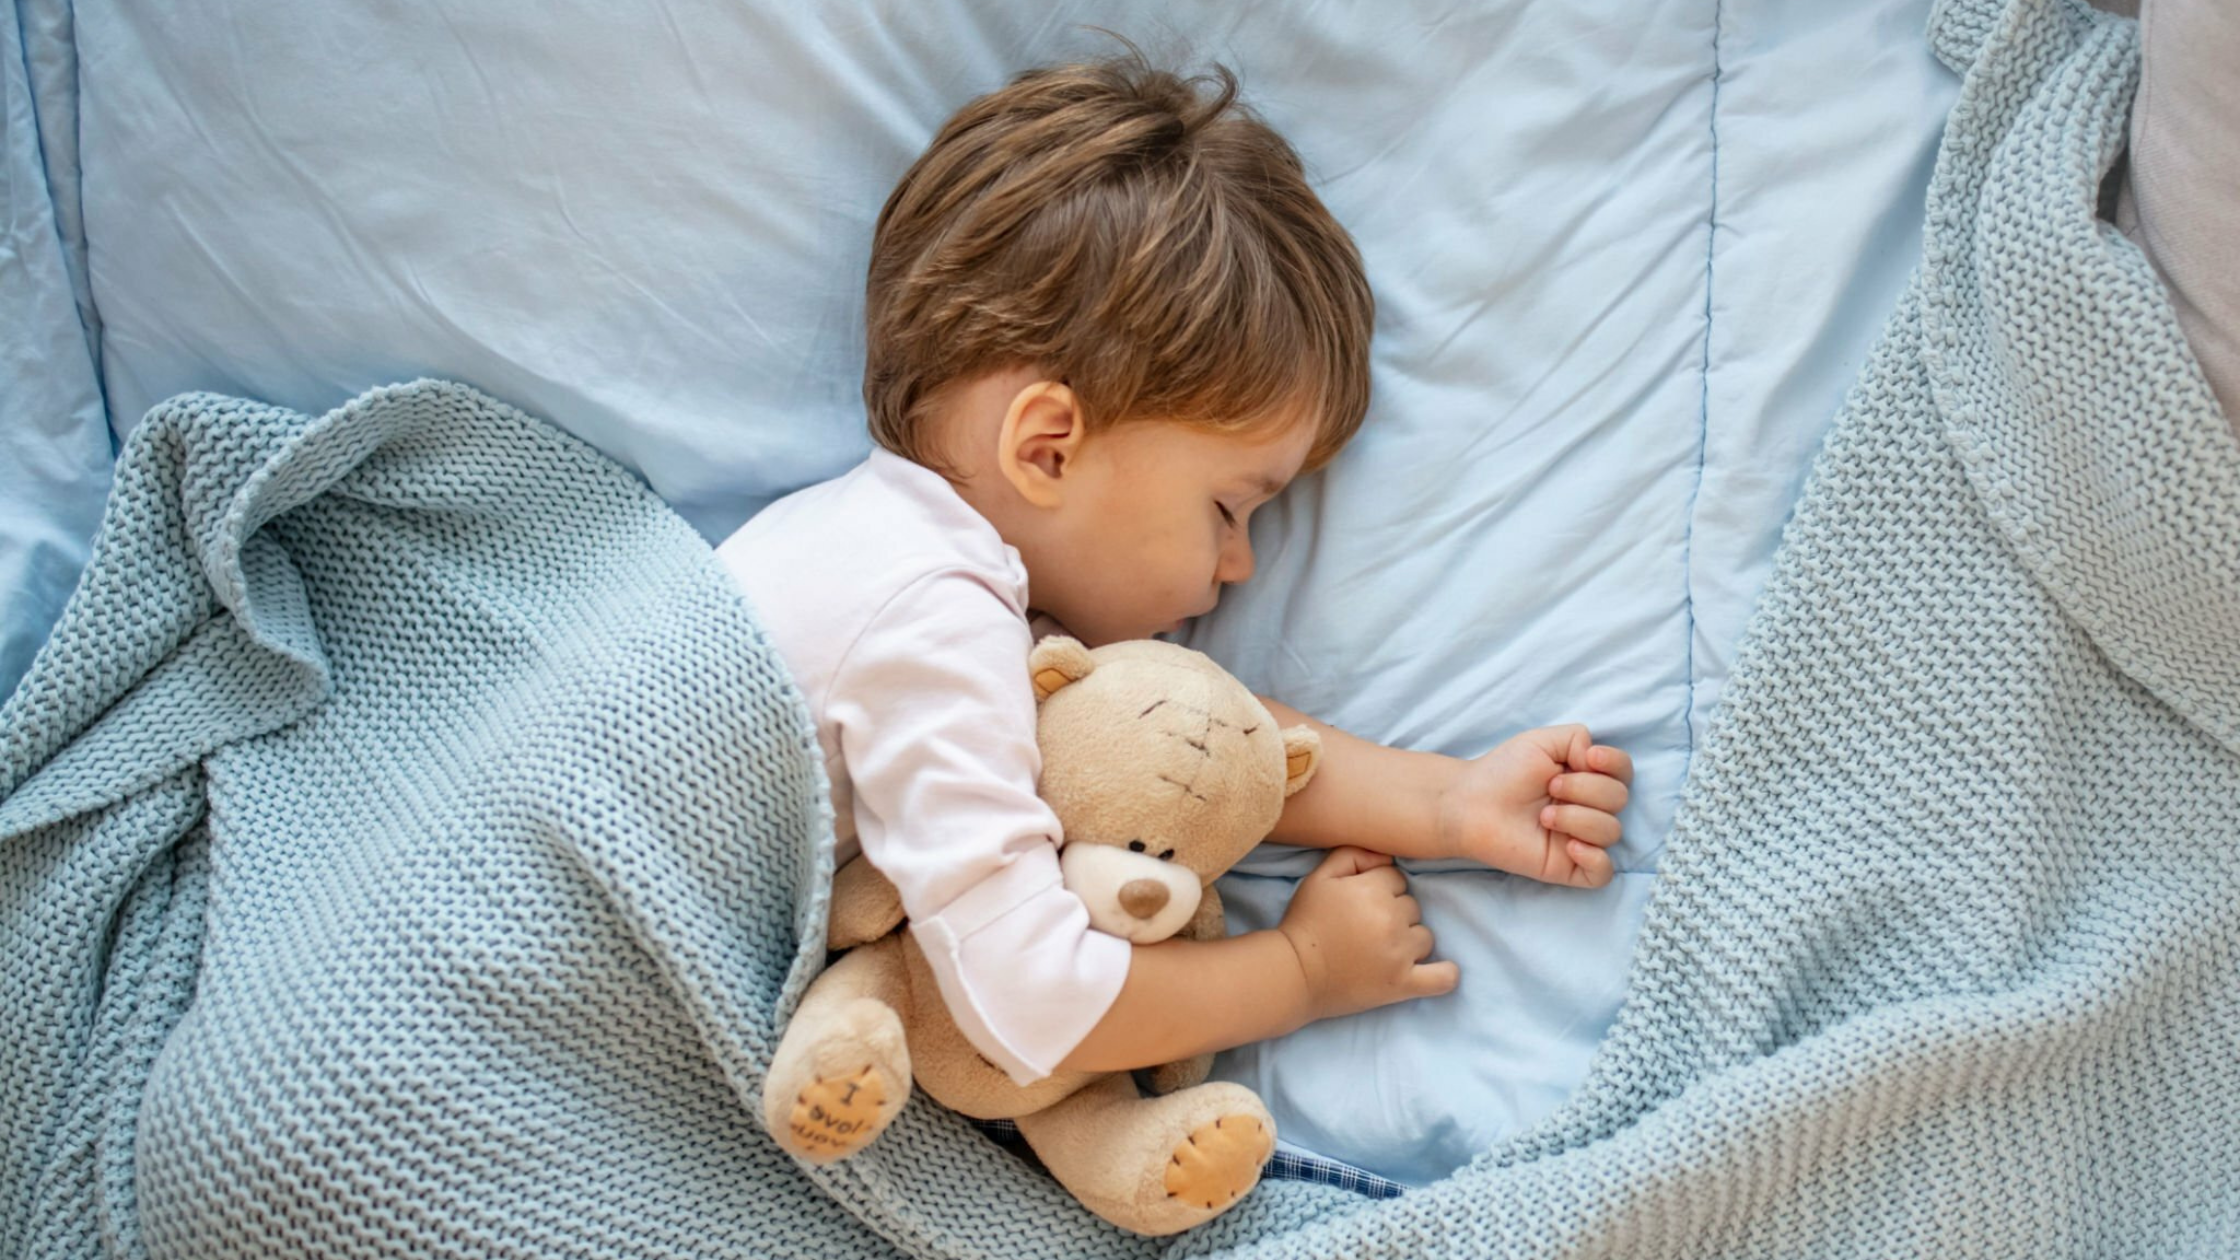 Dr. Frank Discusses Sleep and Eczema with Tips to Get Some Rest